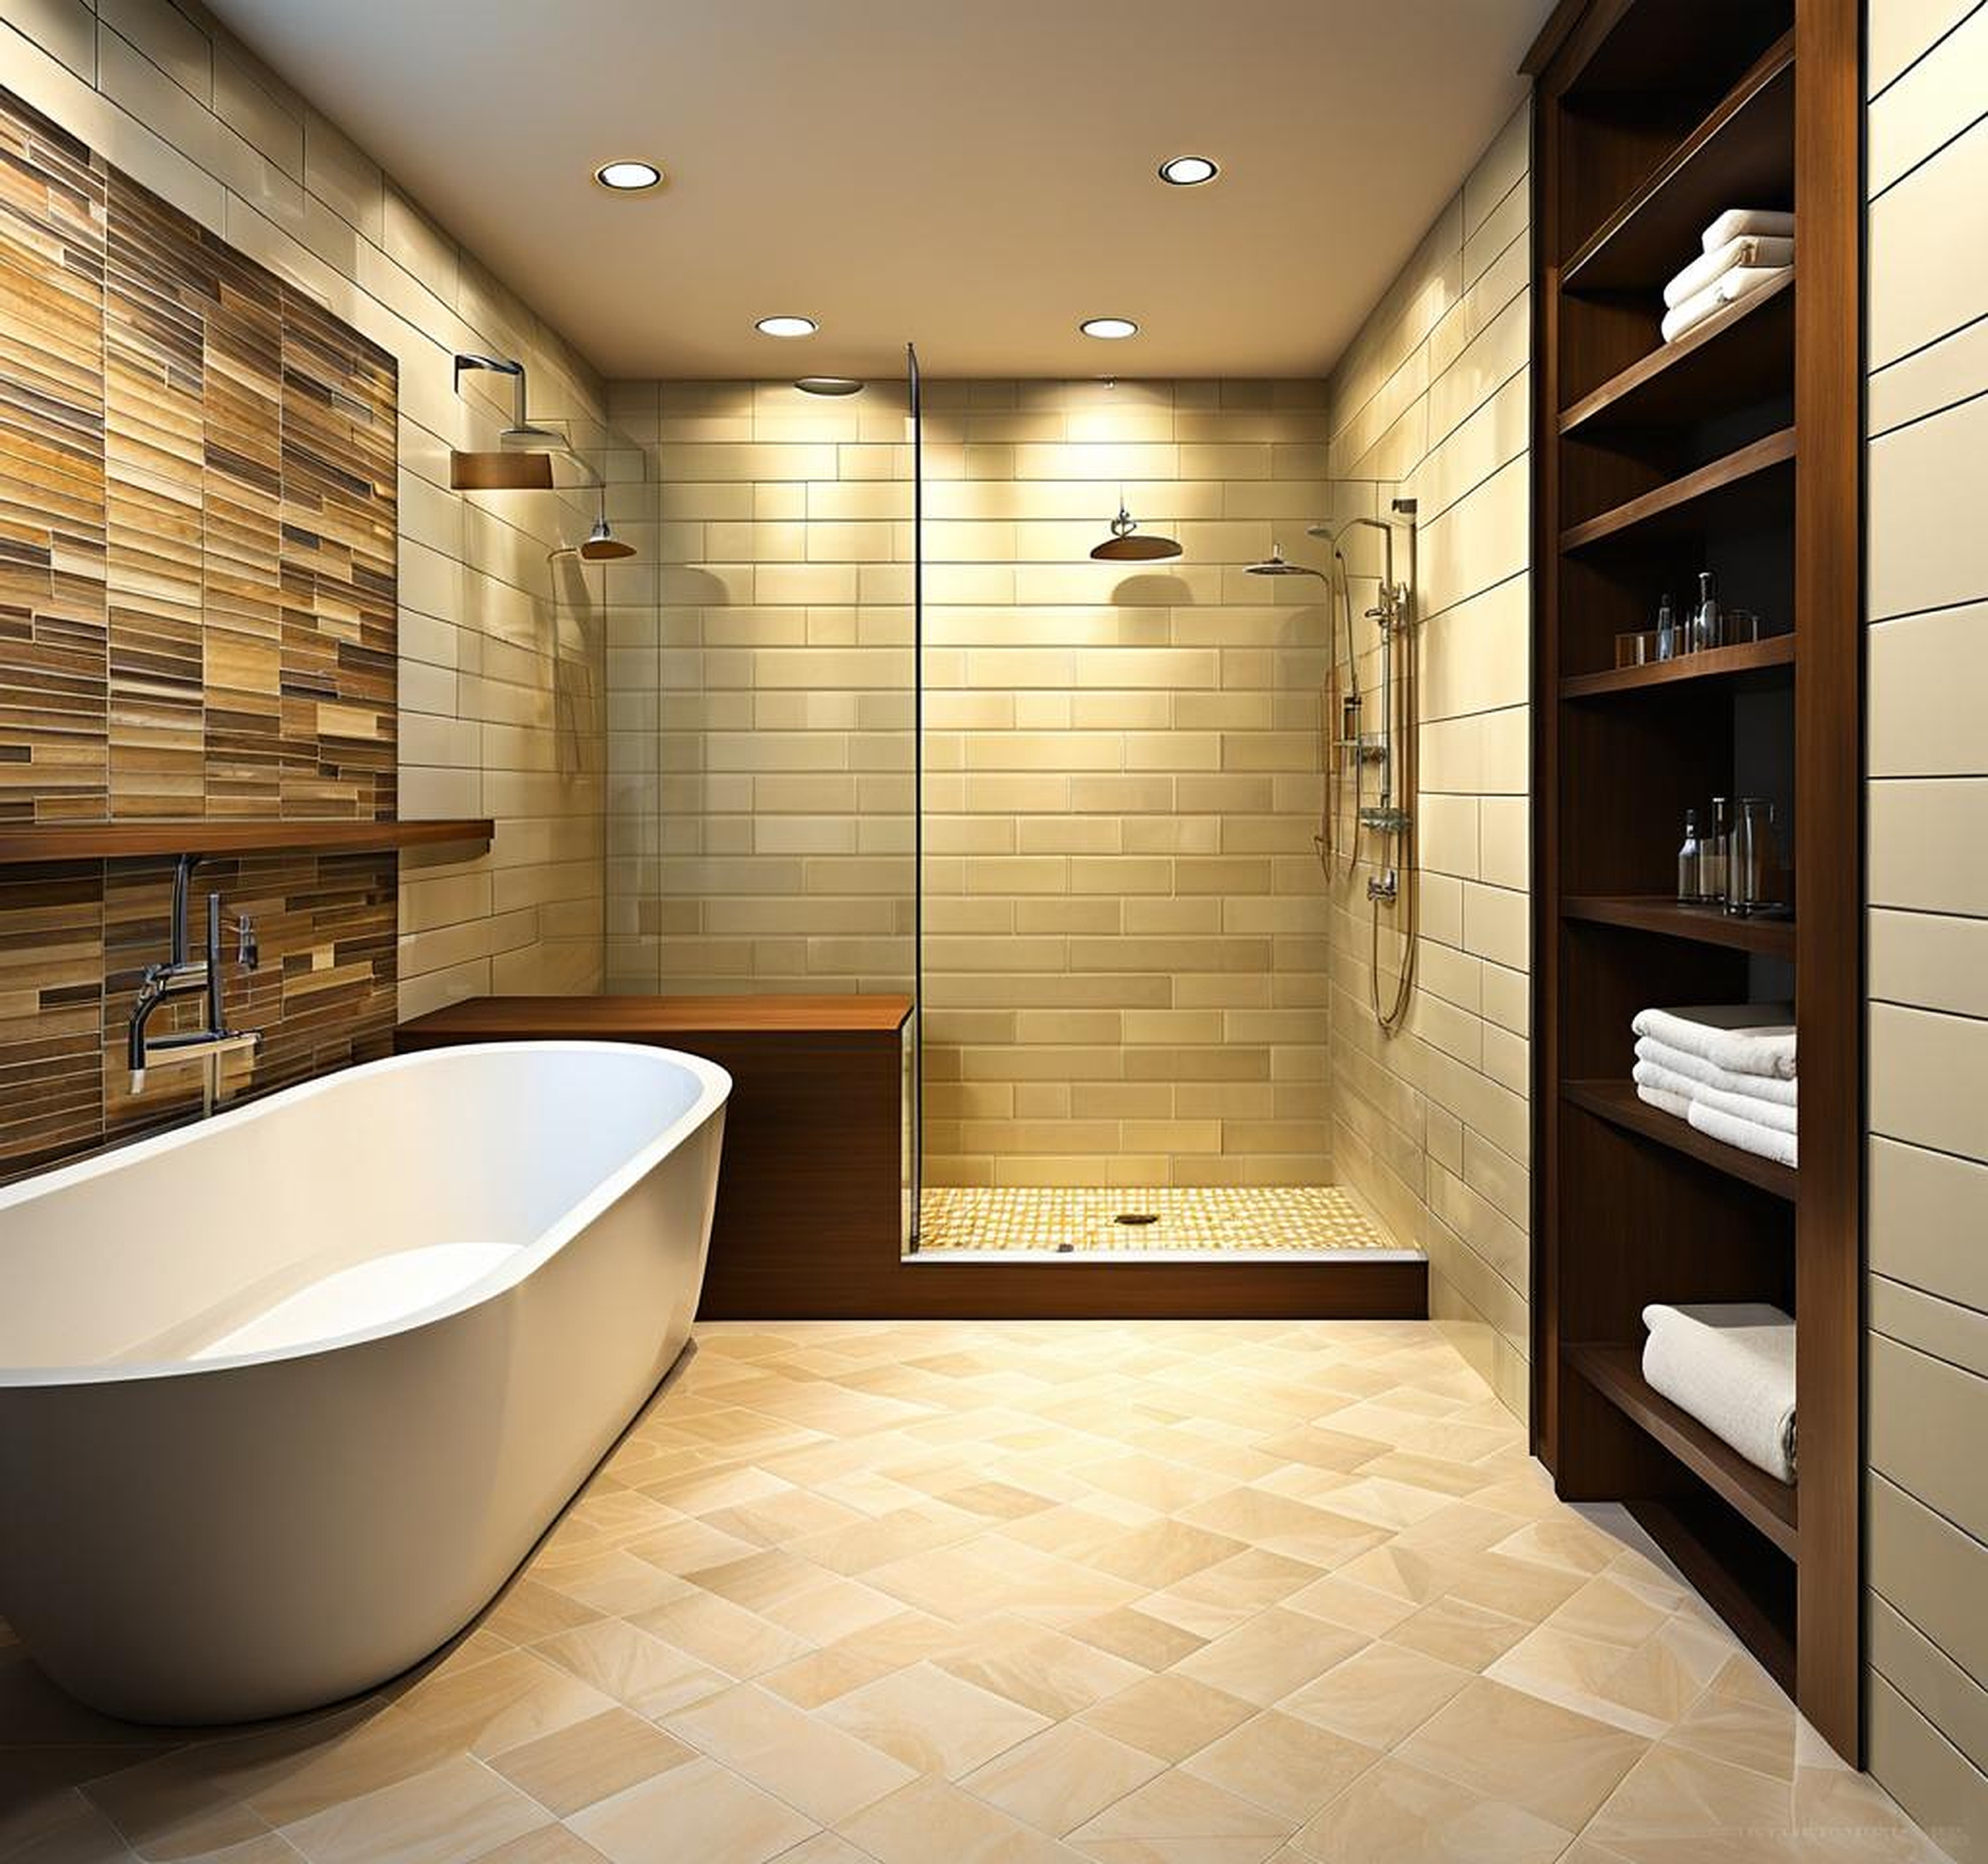 Tile Above Shower Surround Ideas for a Touch of Elegance